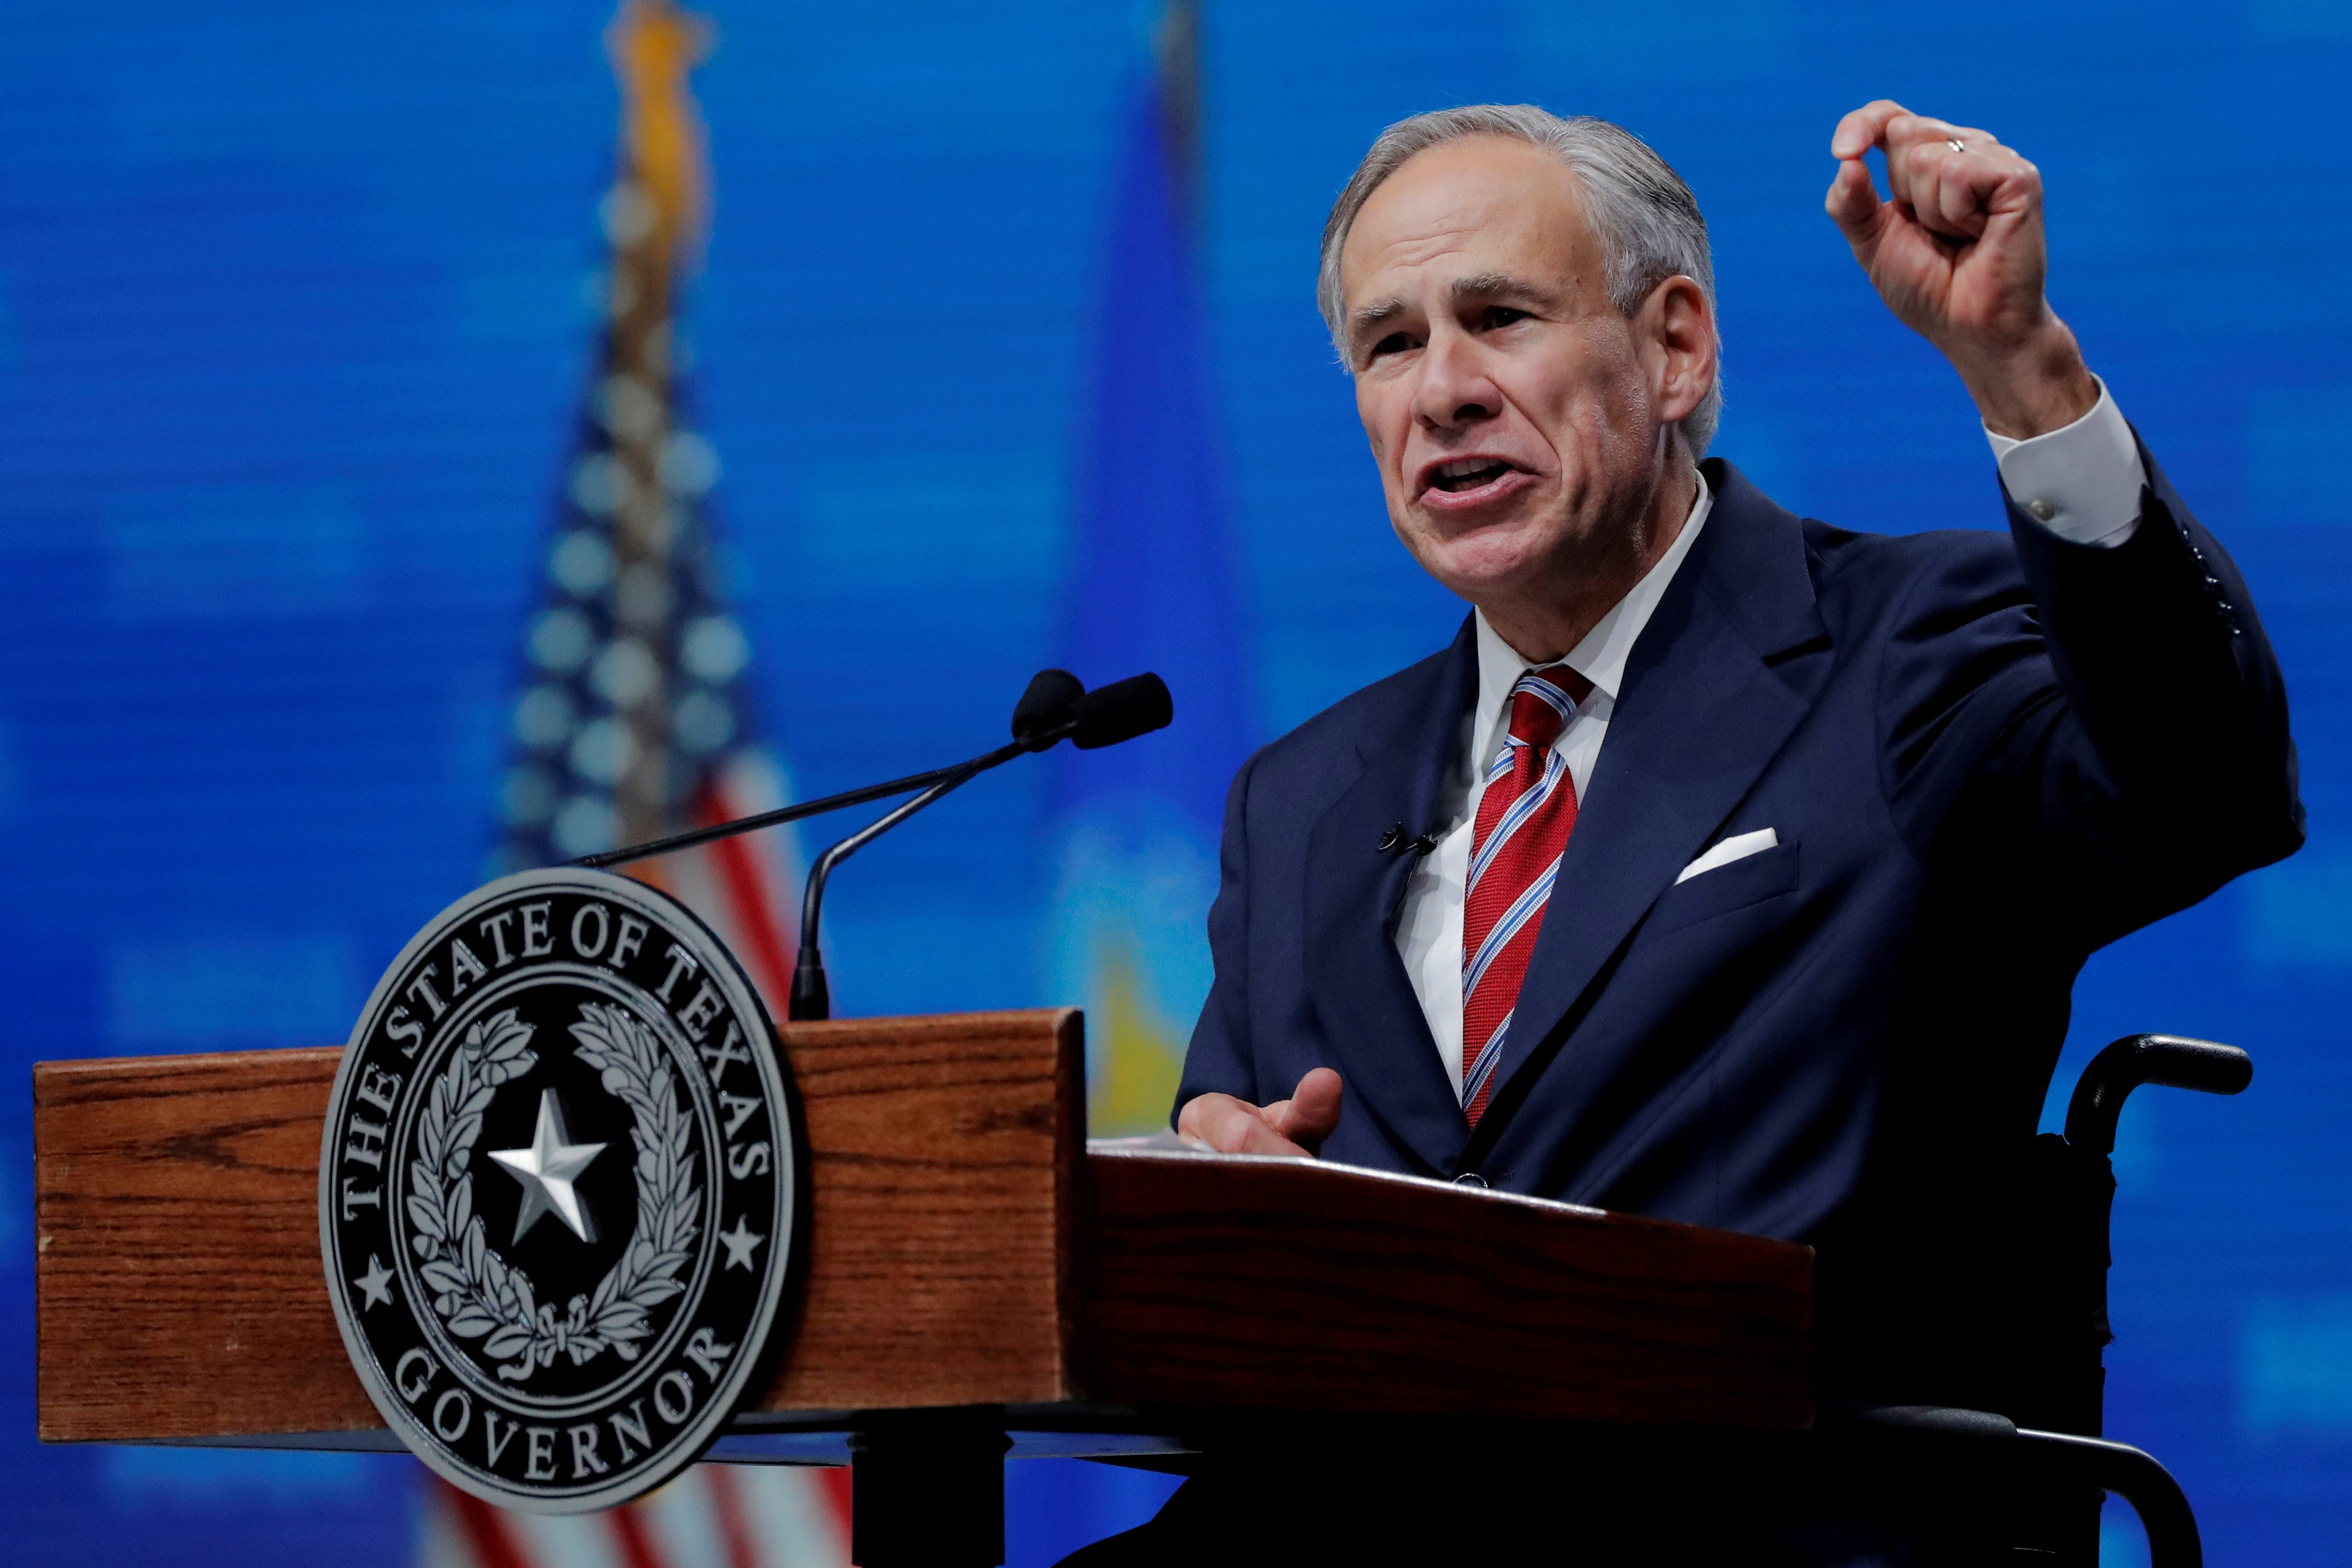 Texas governor bars all COVID-19 vaccine mandates in state, rips Biden for ‘bullying’